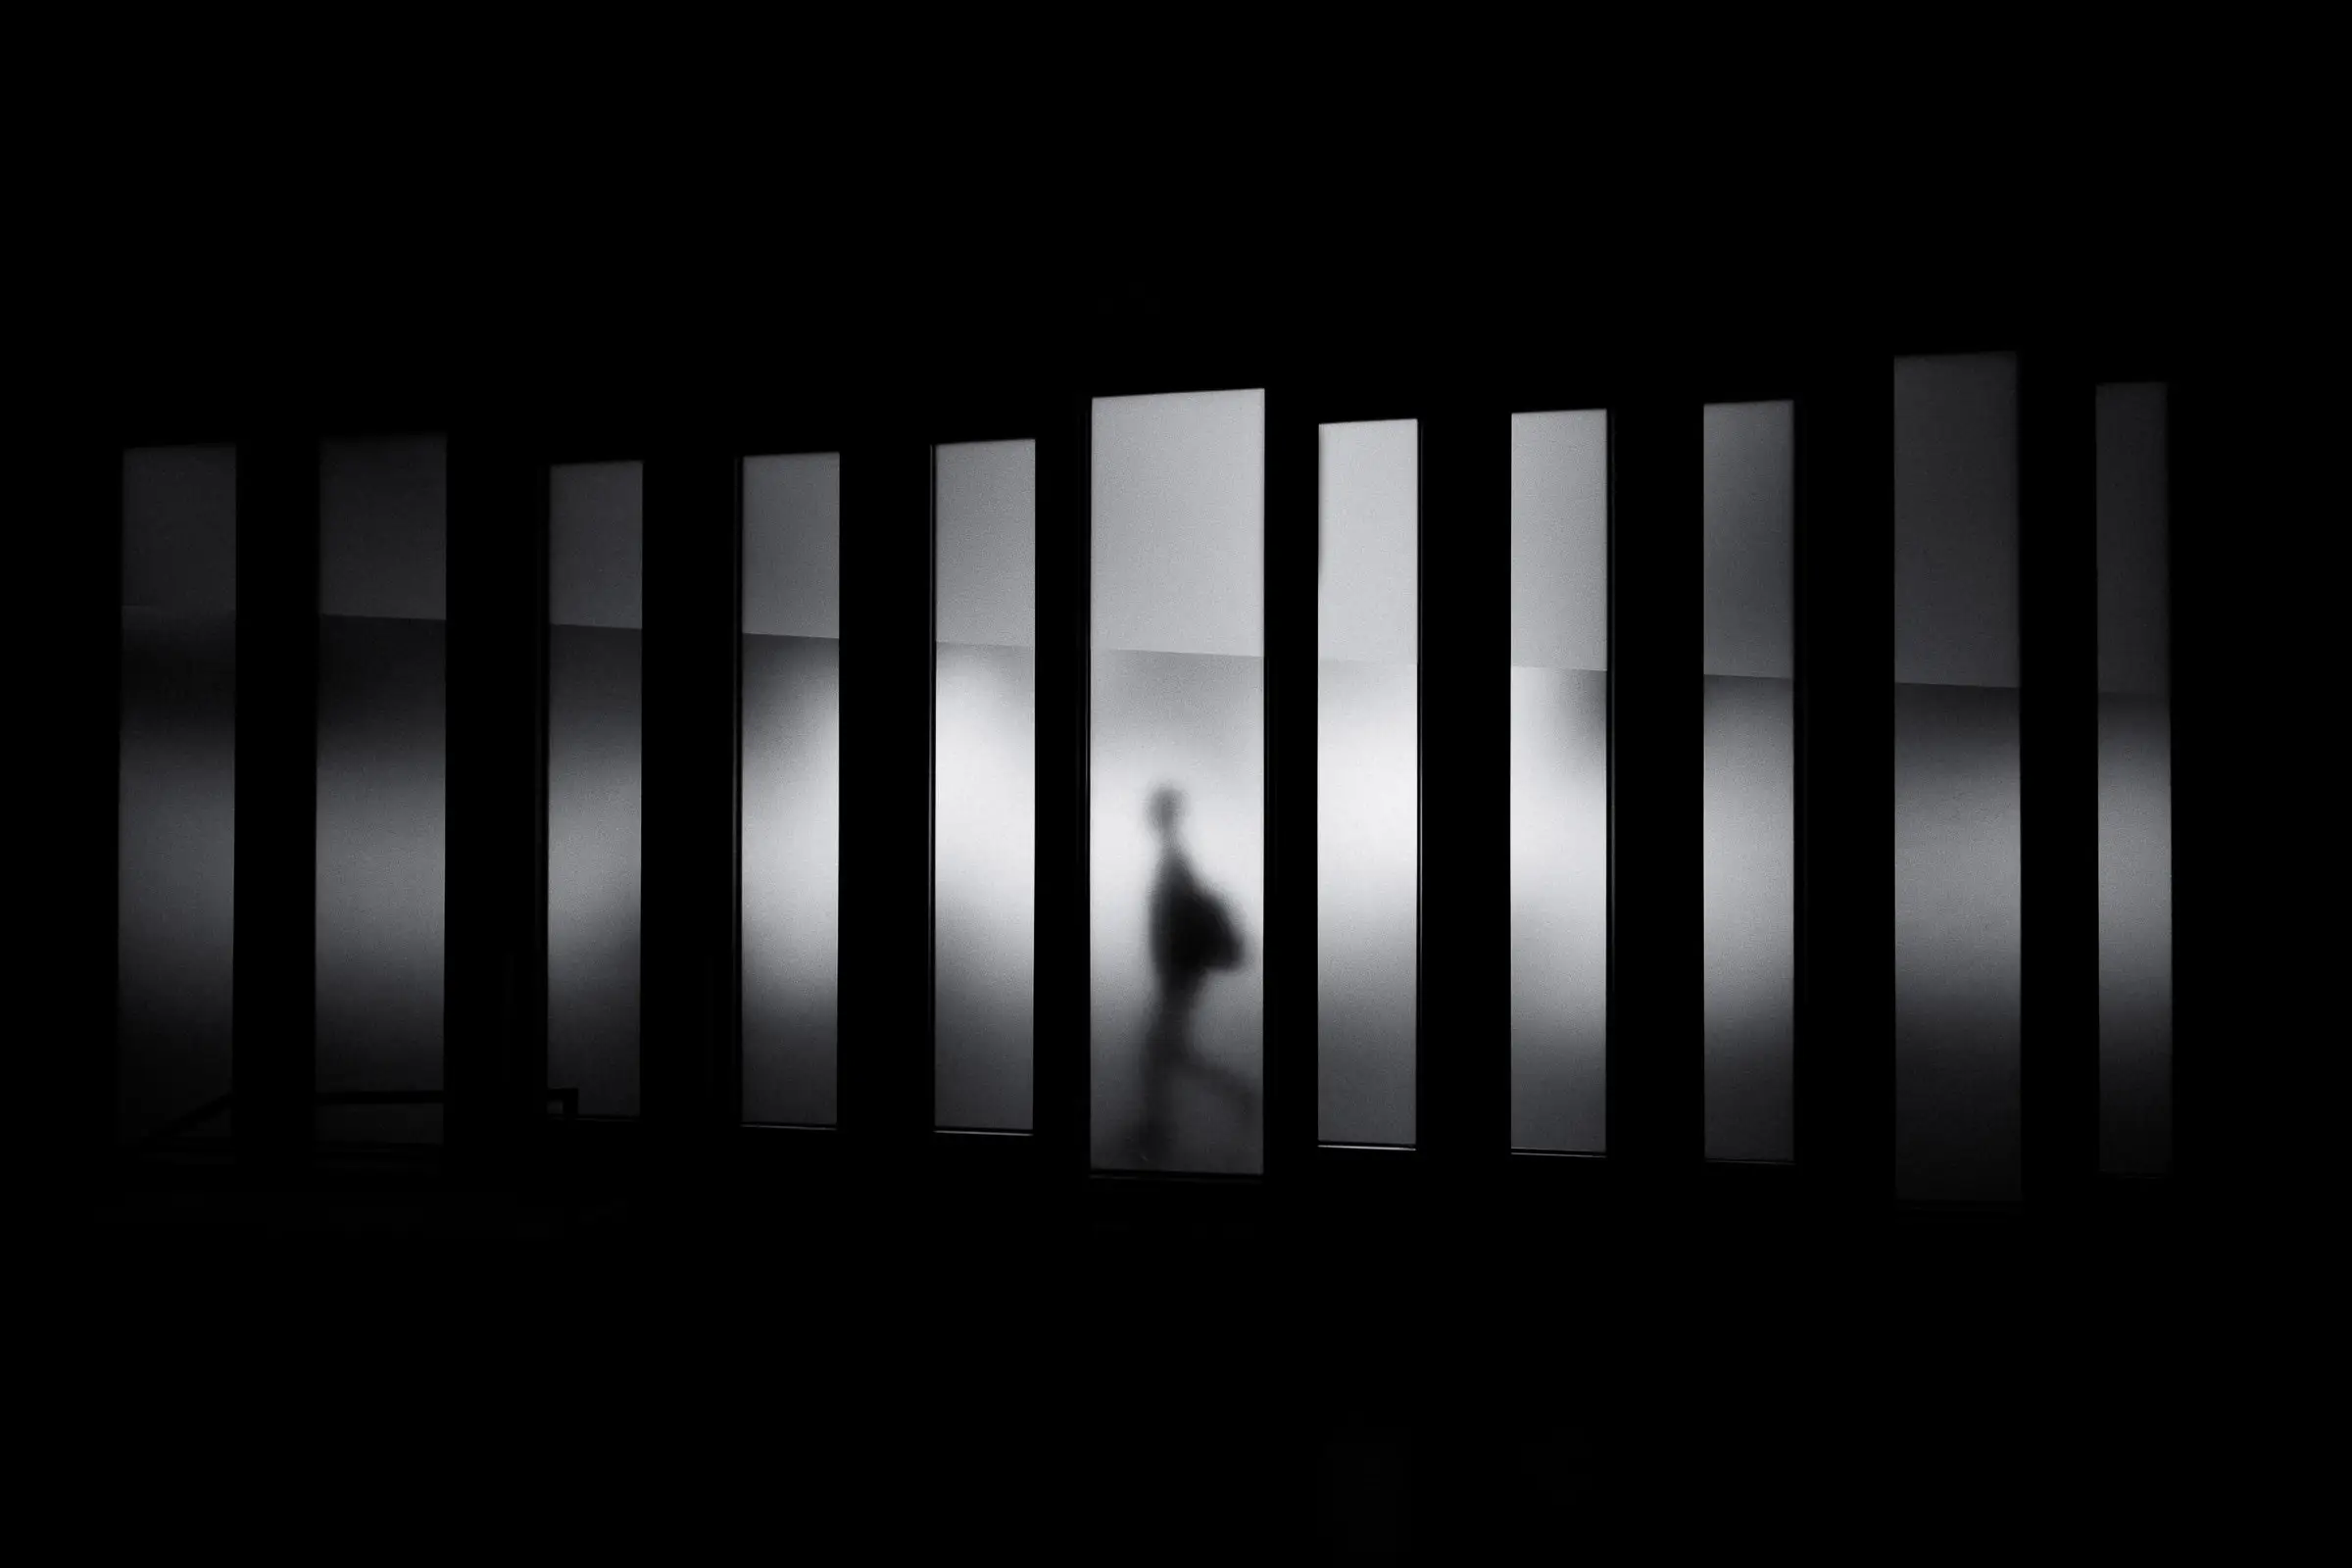 Artistic black and white photo of a person's silhouette seen through vertical light panels